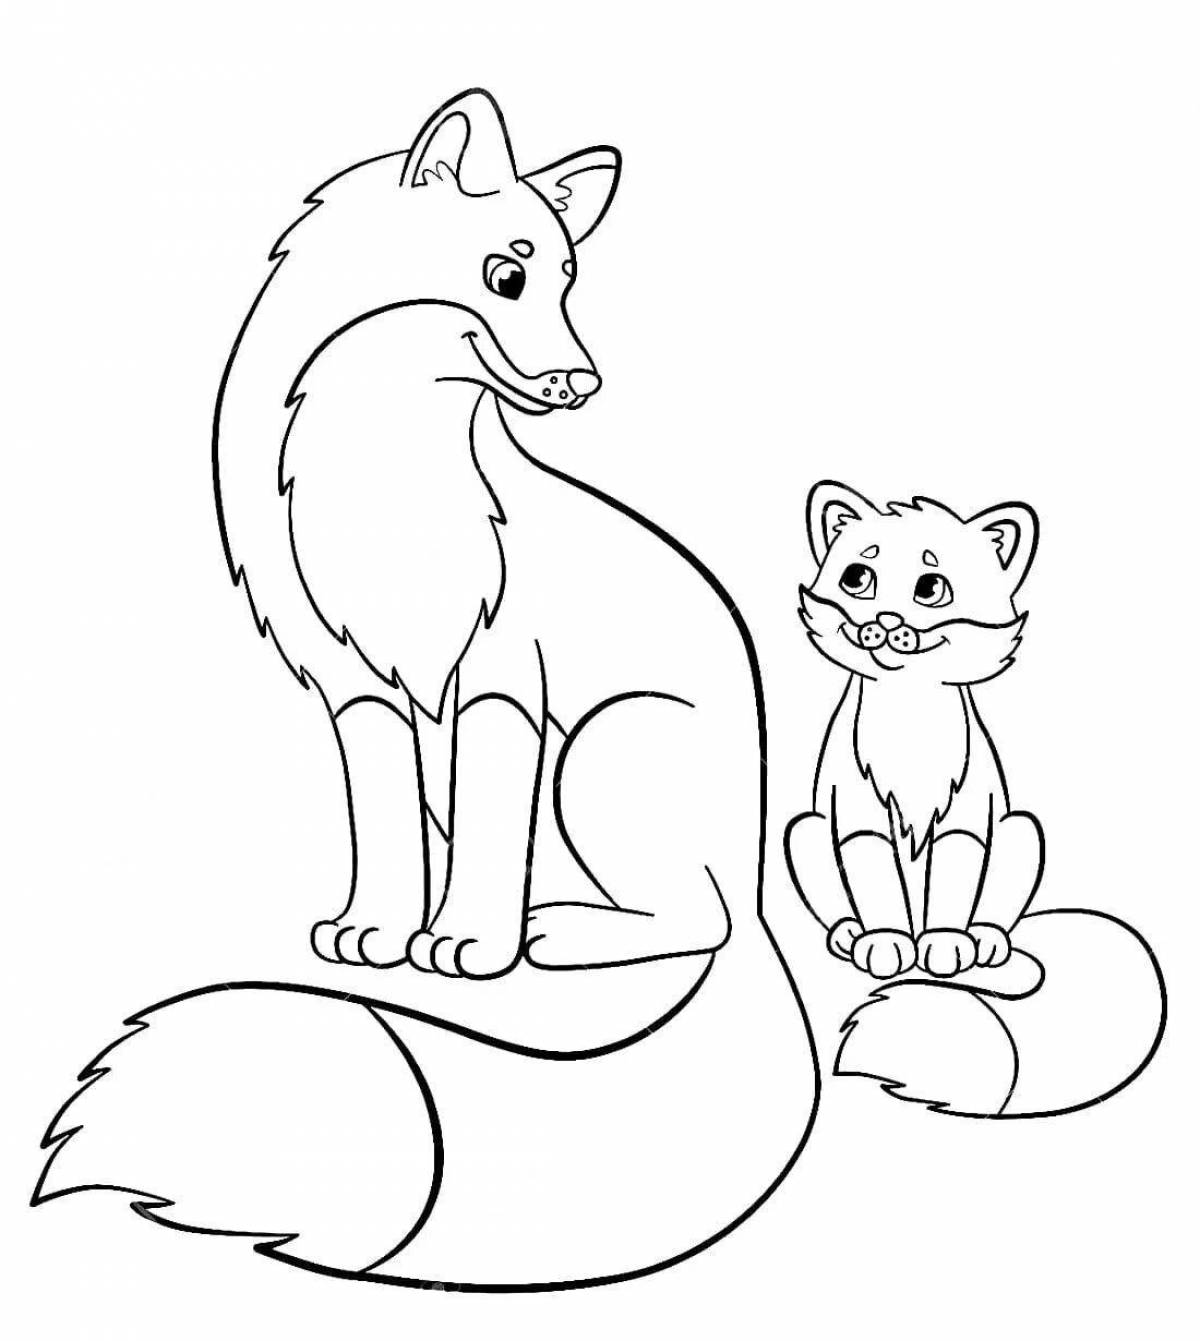 Coloring book funny fox and mouse